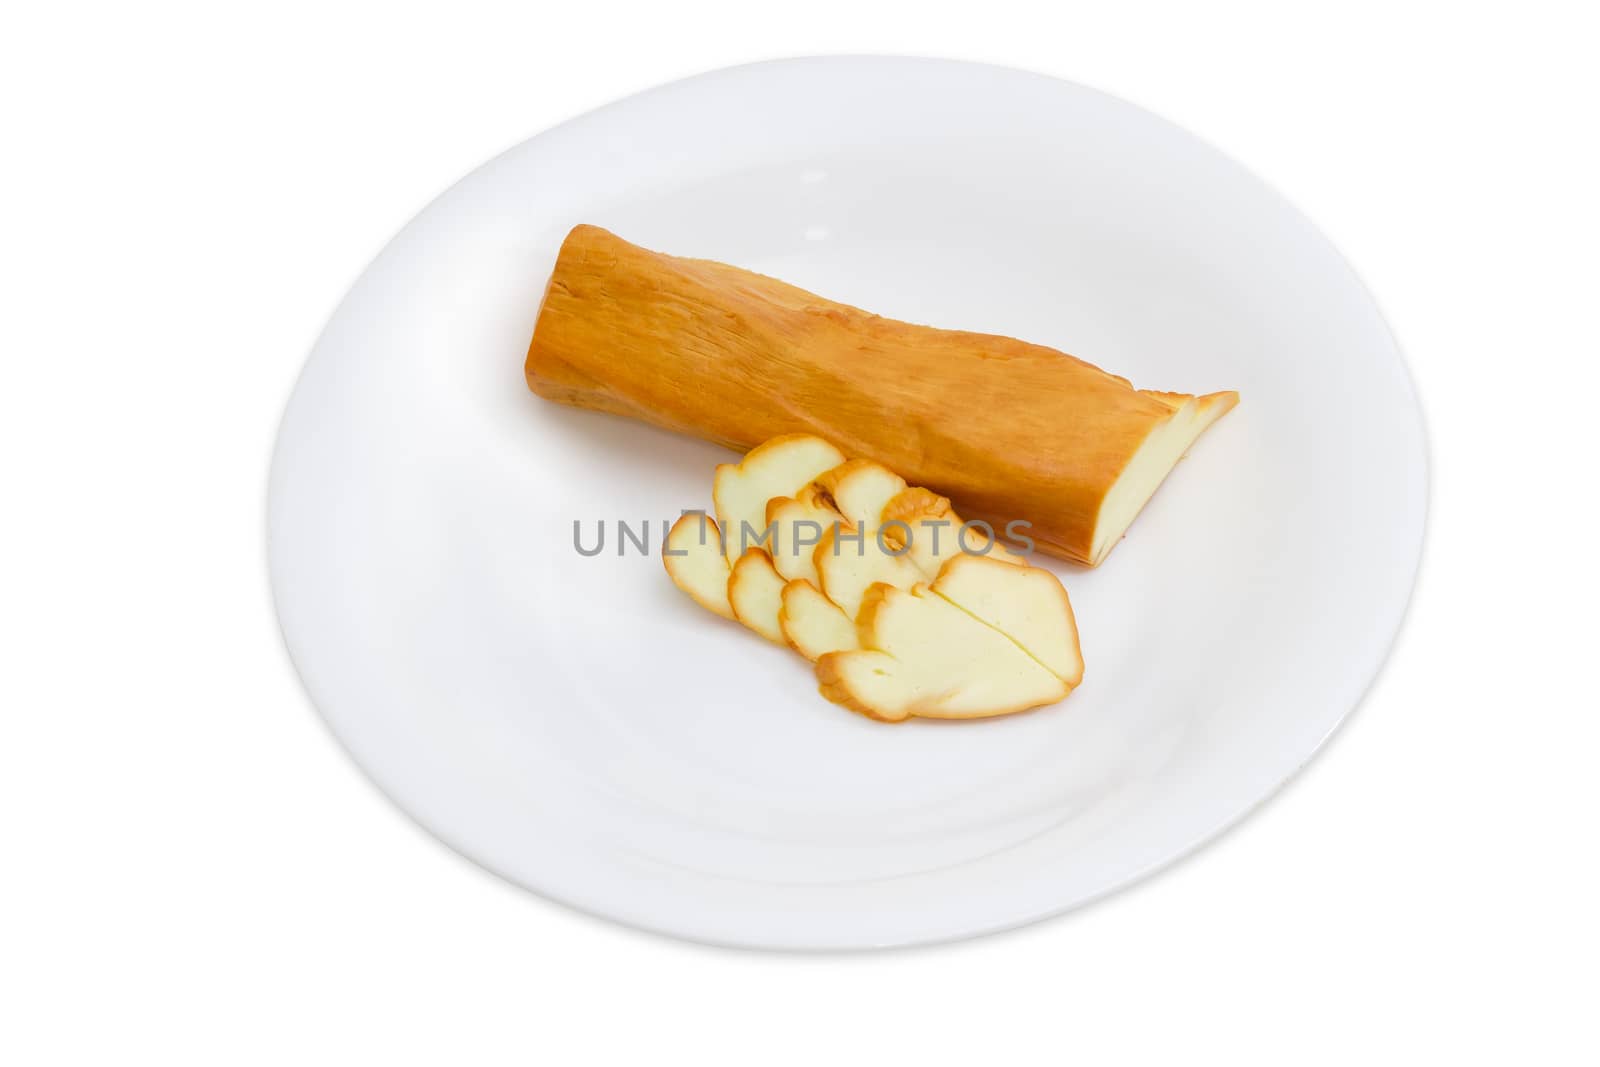 Part of a stick smoked chechil cheese and several slices on a white dish on a light background
